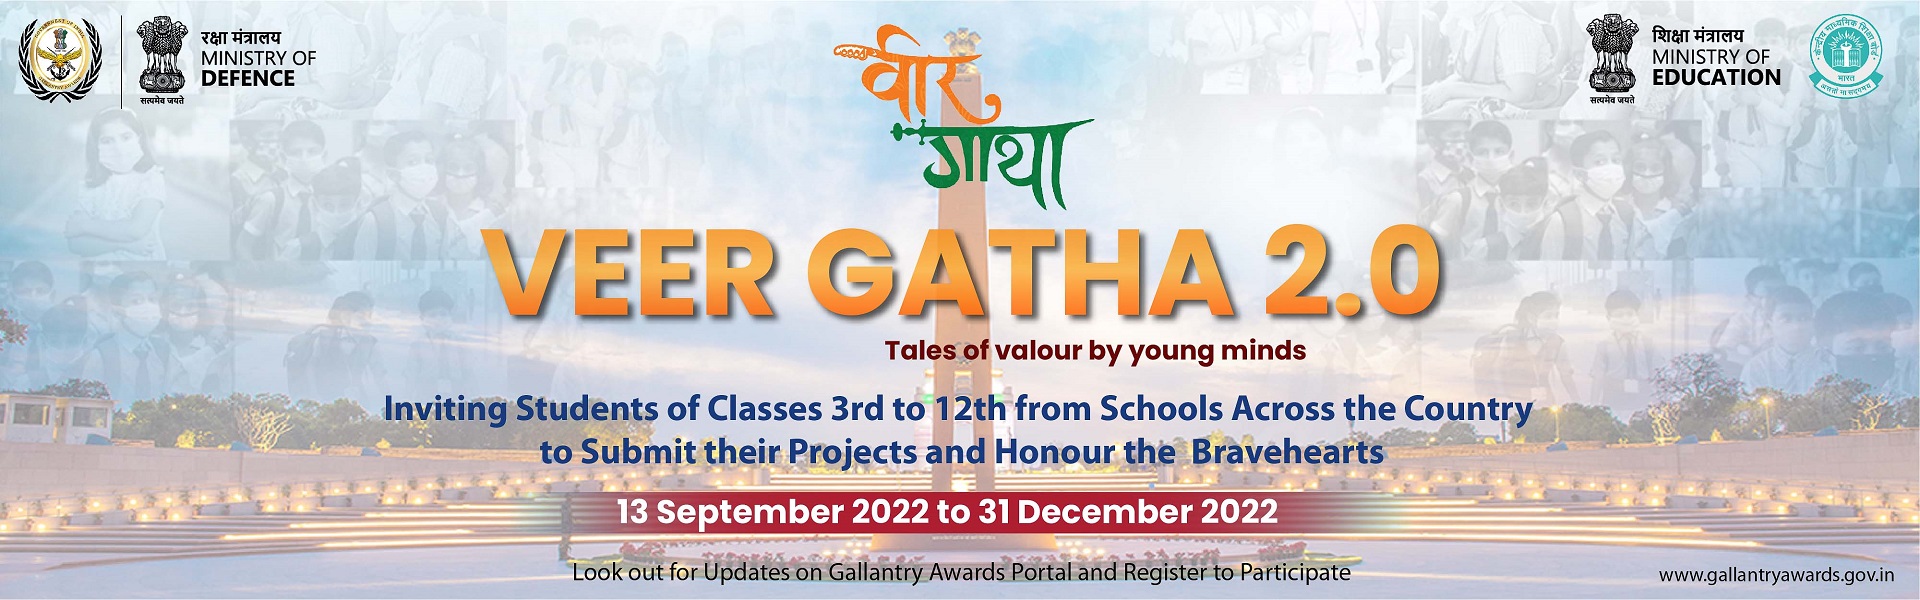  Veer gatha 2.0 : Tales of valour by Young Minds